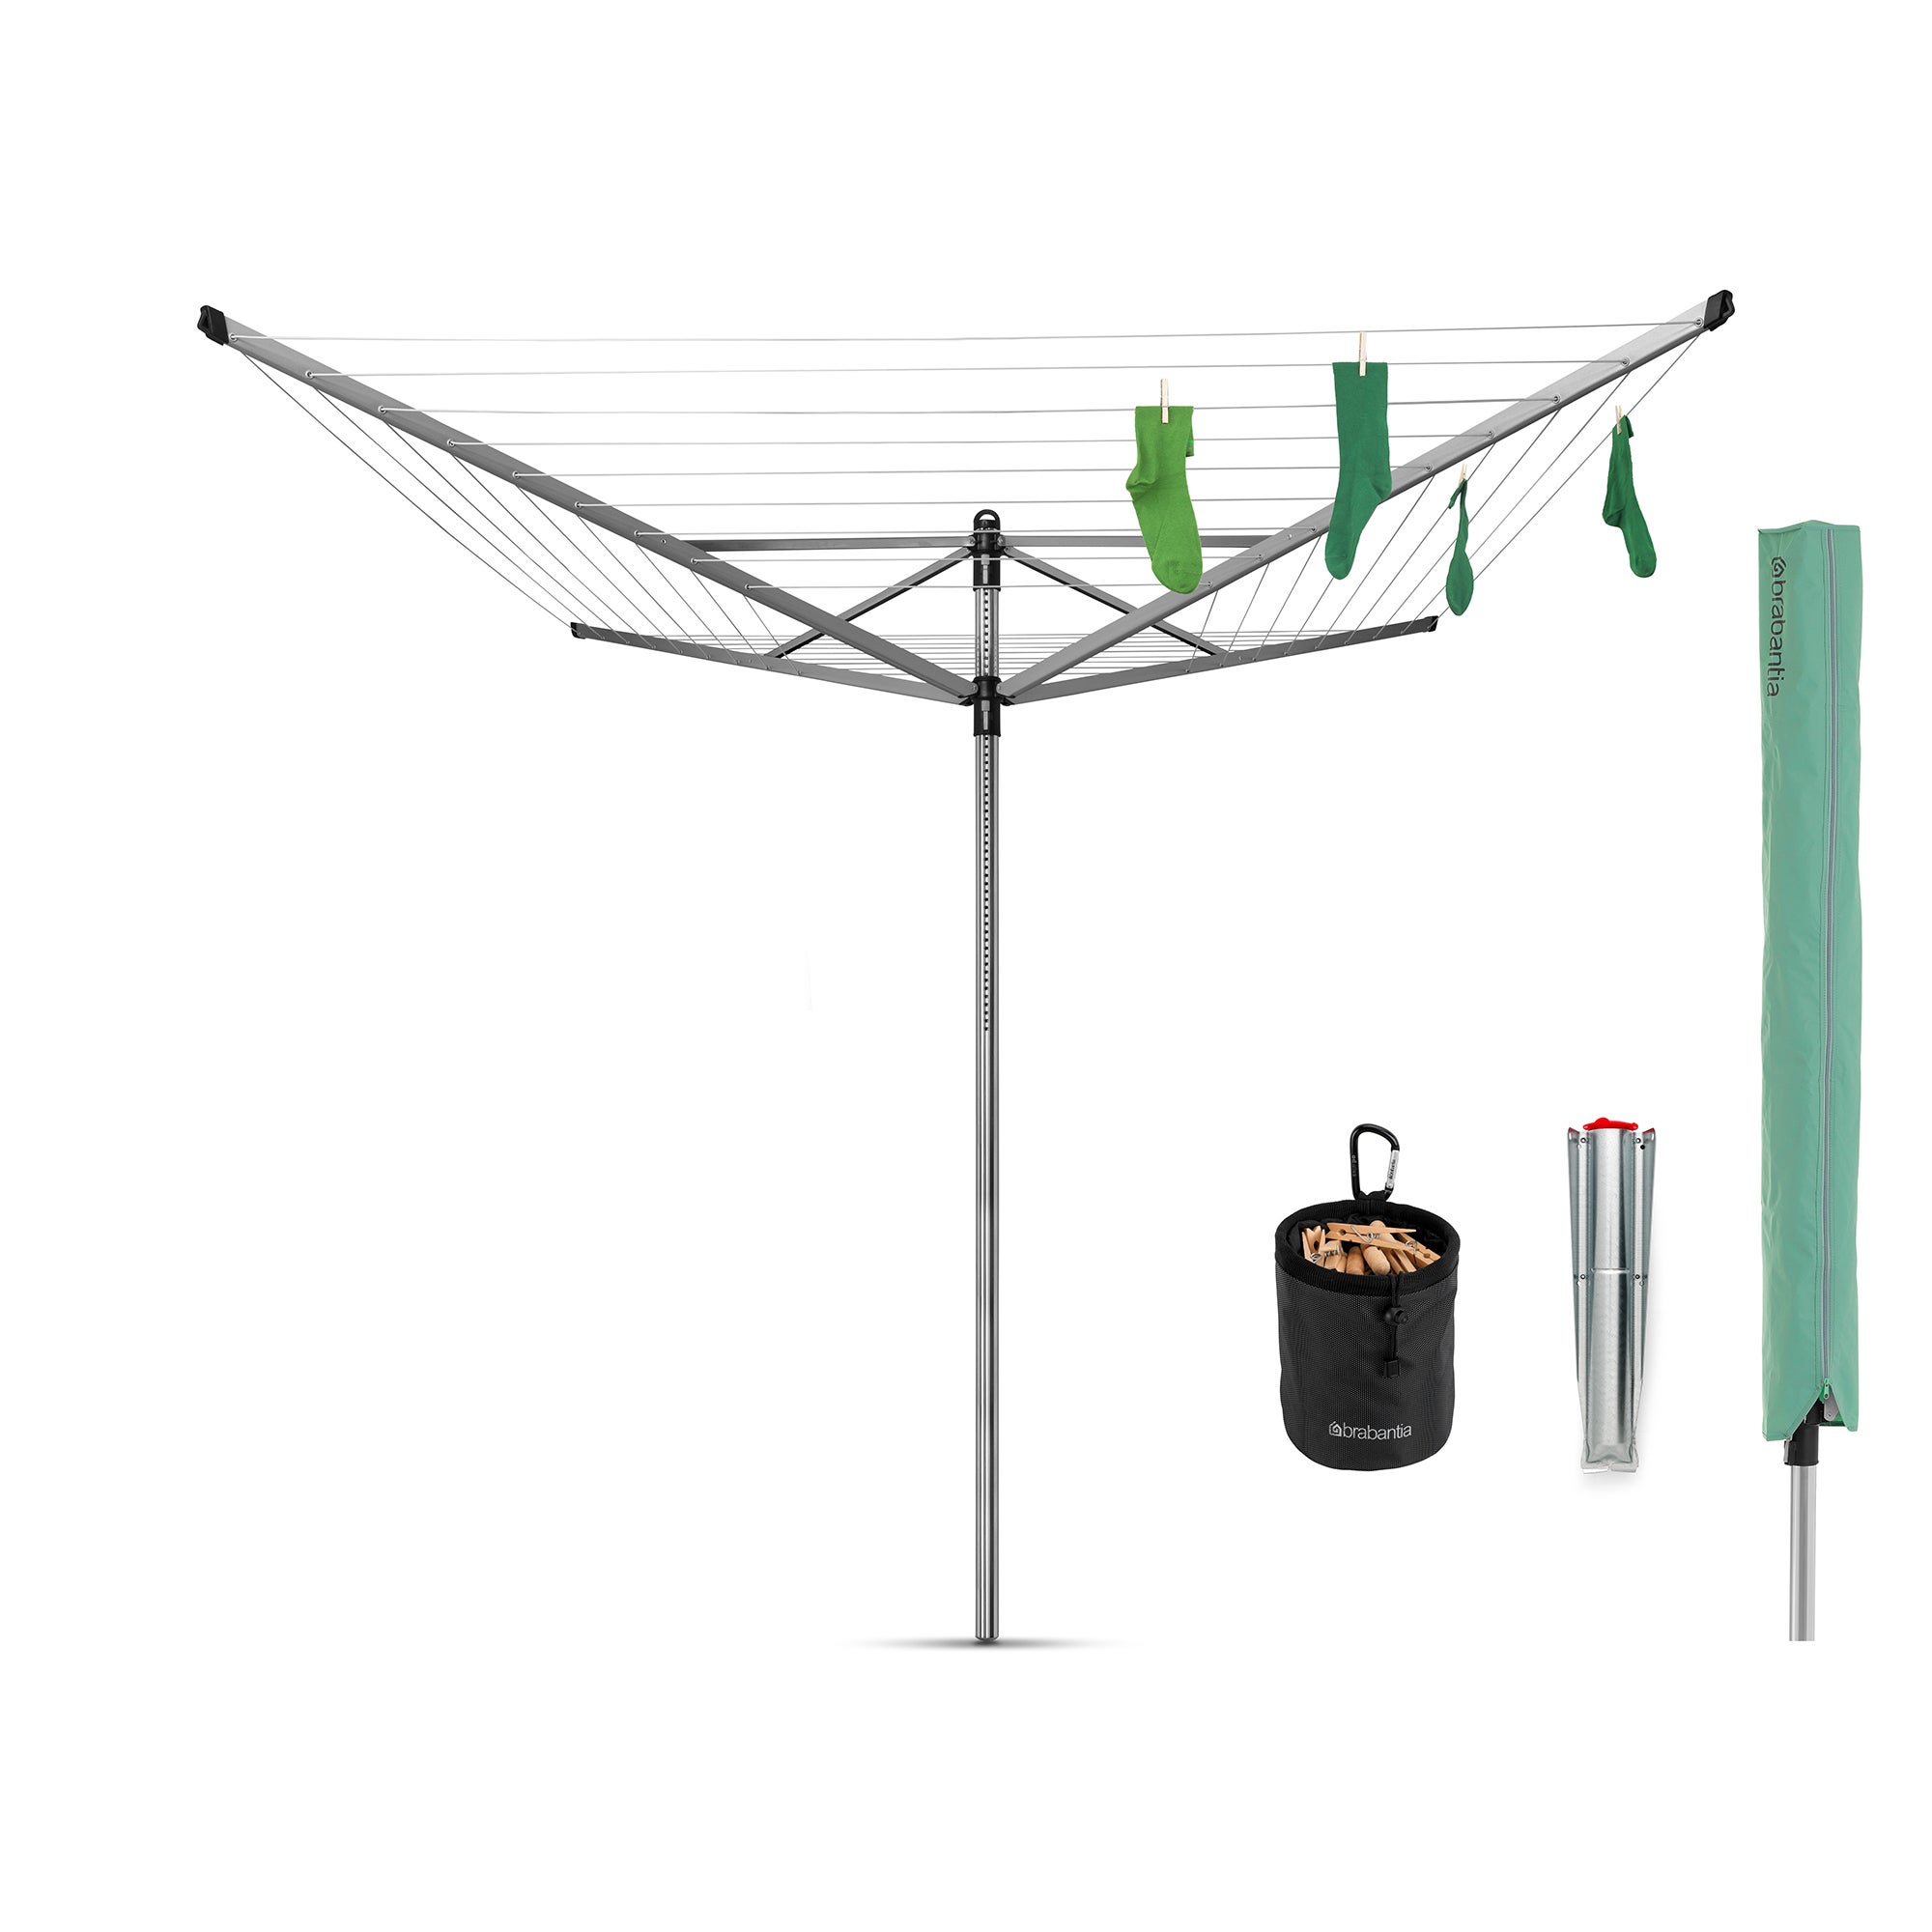 Brabantia 4 Arm Lift-O-Matic 50M Rotary Washing Line with Accessories